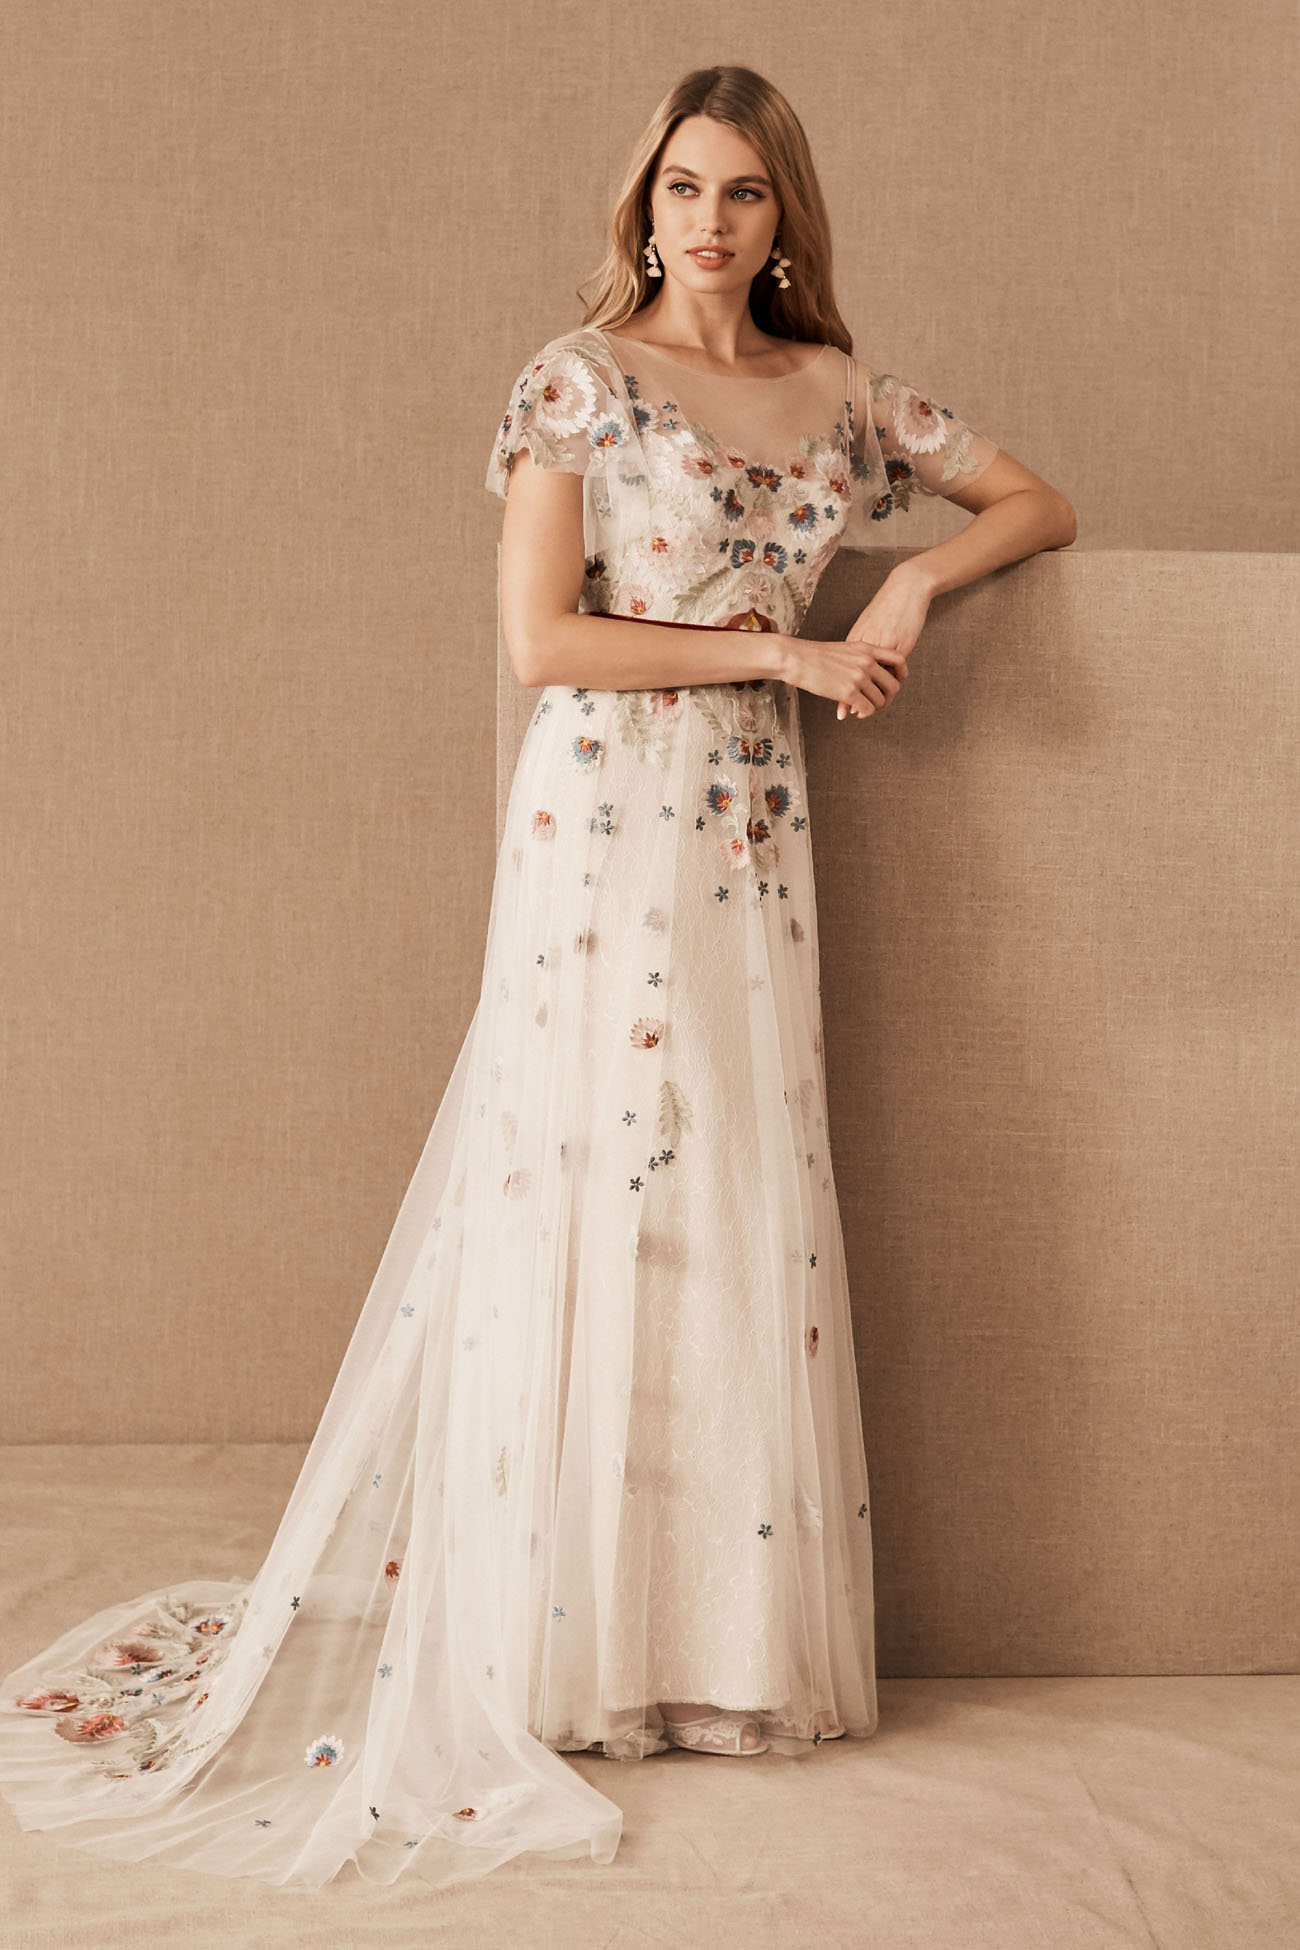 BHLDN embroidered wedding dress- Spring 2020 collection